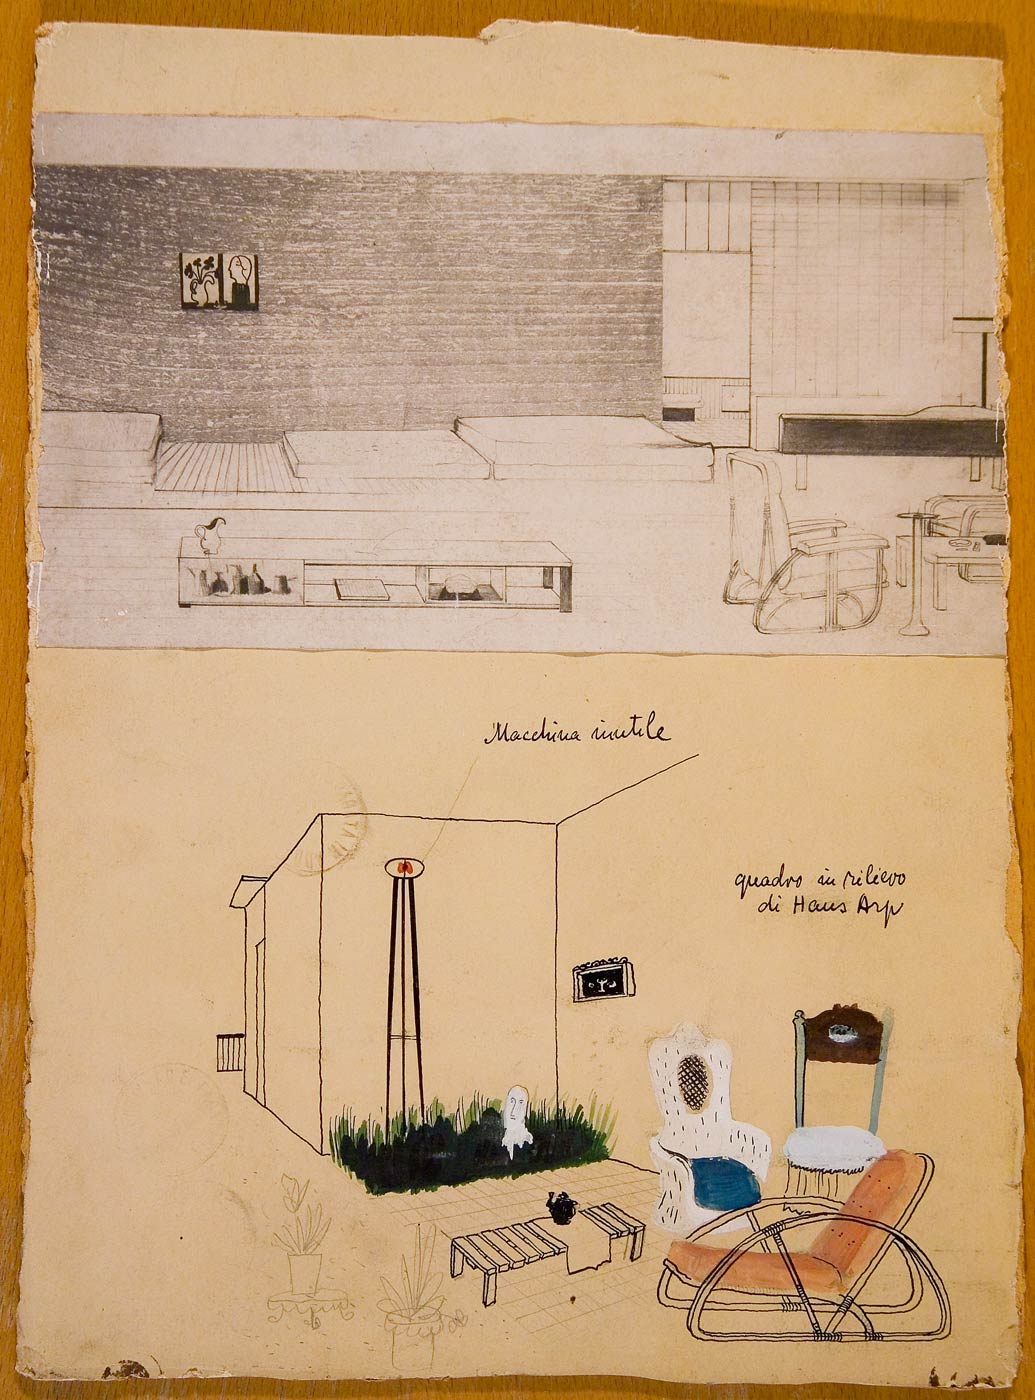 Top: reproduction of a 1940 Steinberg drawing of a modern interior. 4 ½ x 8 in., mounted on board. Bottom: design of an interior-exterior with a Hans Arp painting and Bruno Munari’s <em>Macchina inutile</em>, 1940. Pencil, ink, and gouache on board, 11 5/8 x 8 ½ in. Both drawings made for a Politenico examination. Angelini Collection.